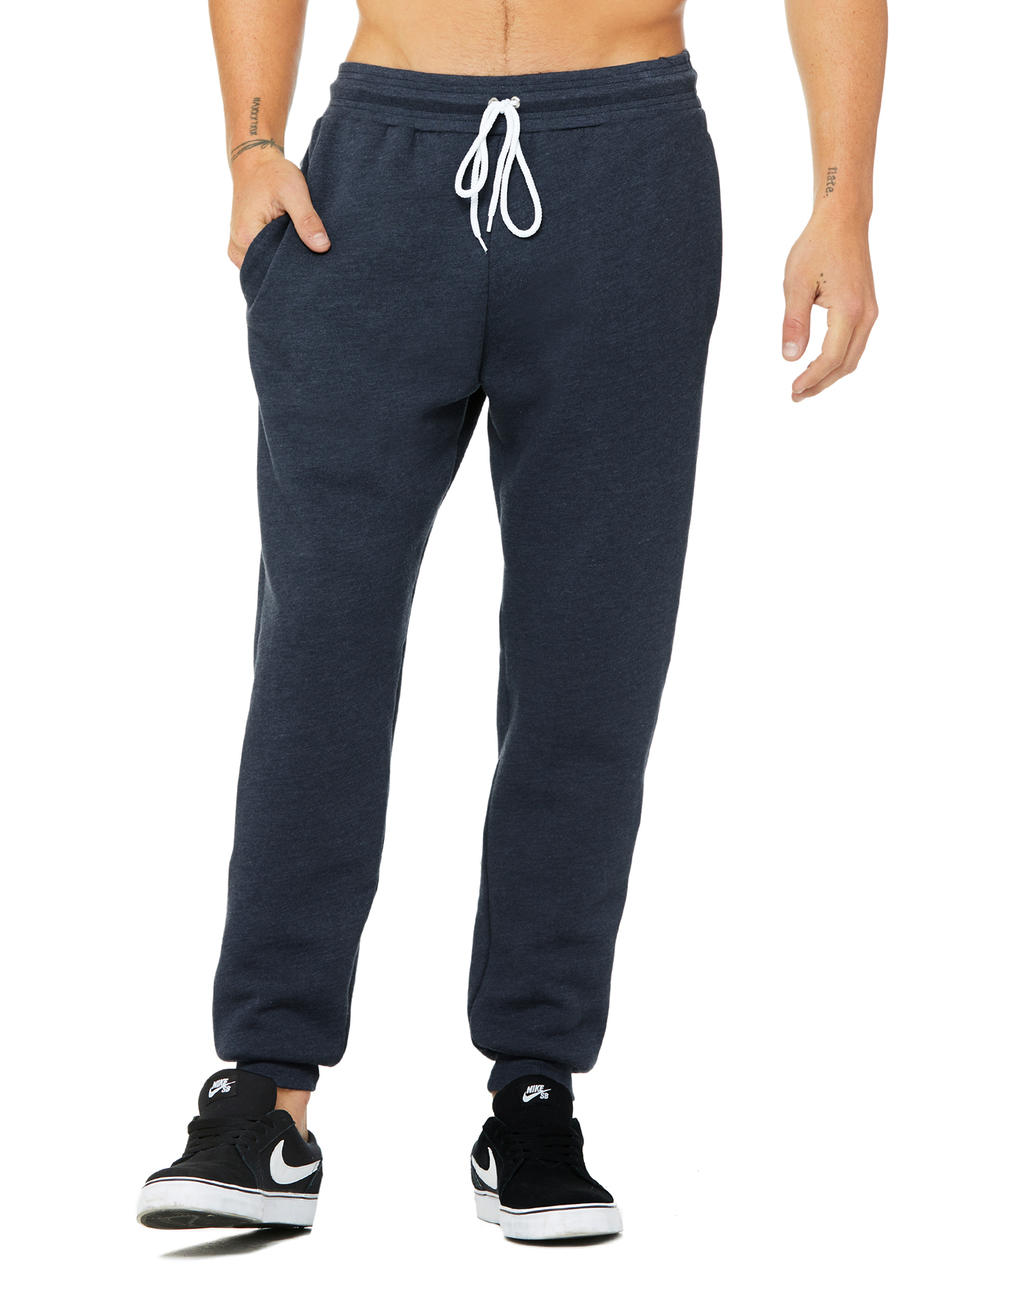  Unisex Jogger Sweatpants in Farbe Heather Navy